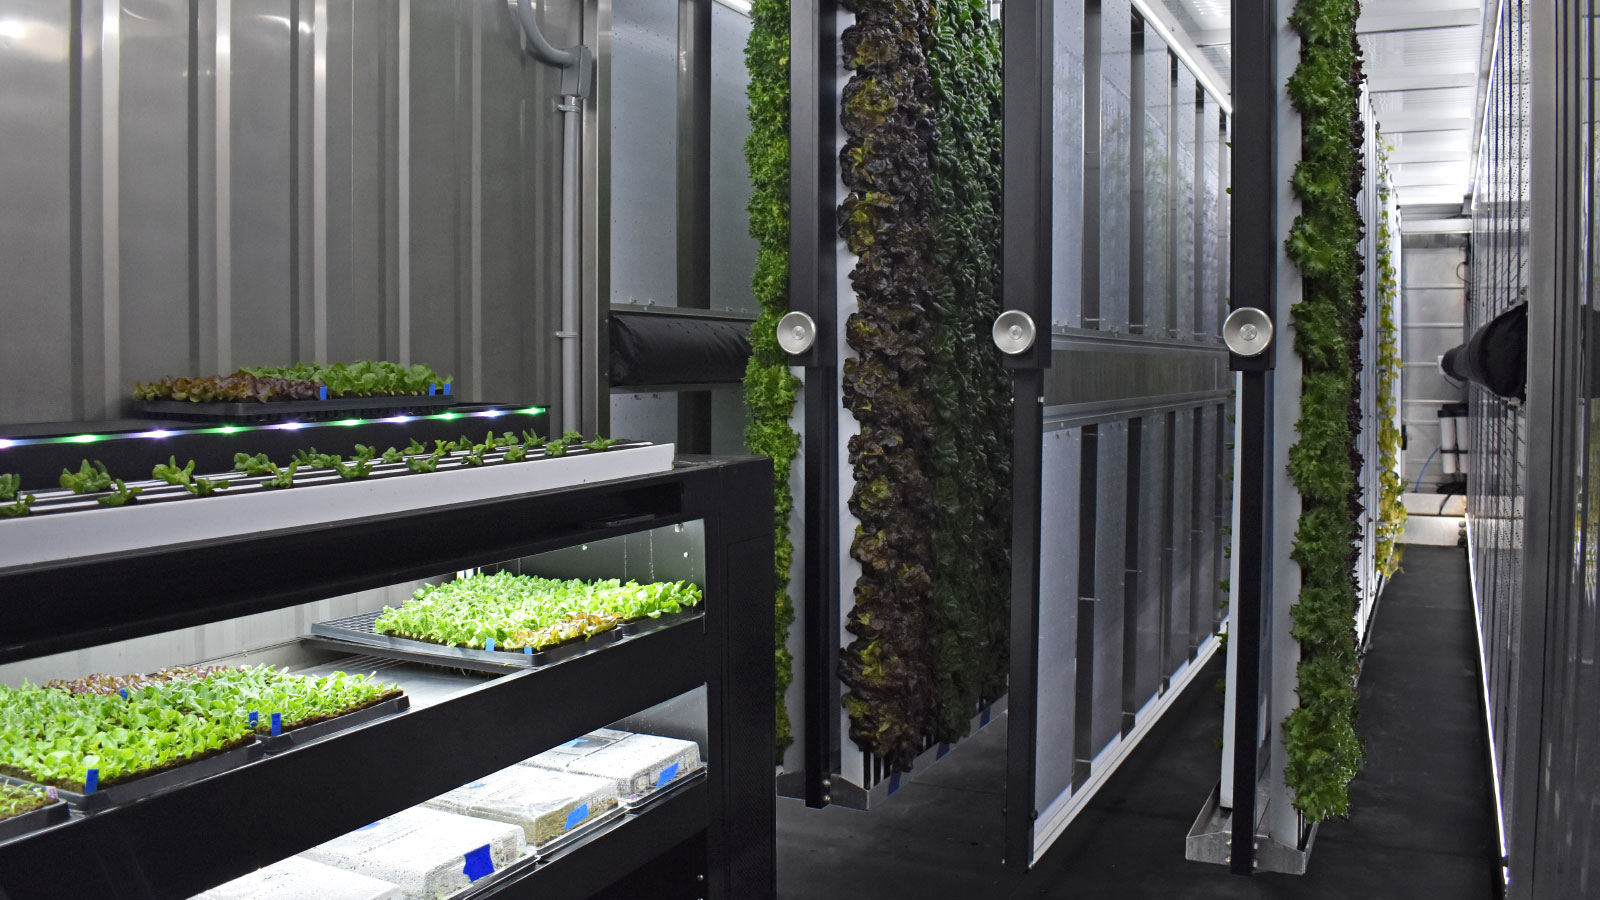 Indoor vegetable nursery with trays of baby lettuce and vertical hanging planters with adult lettuce